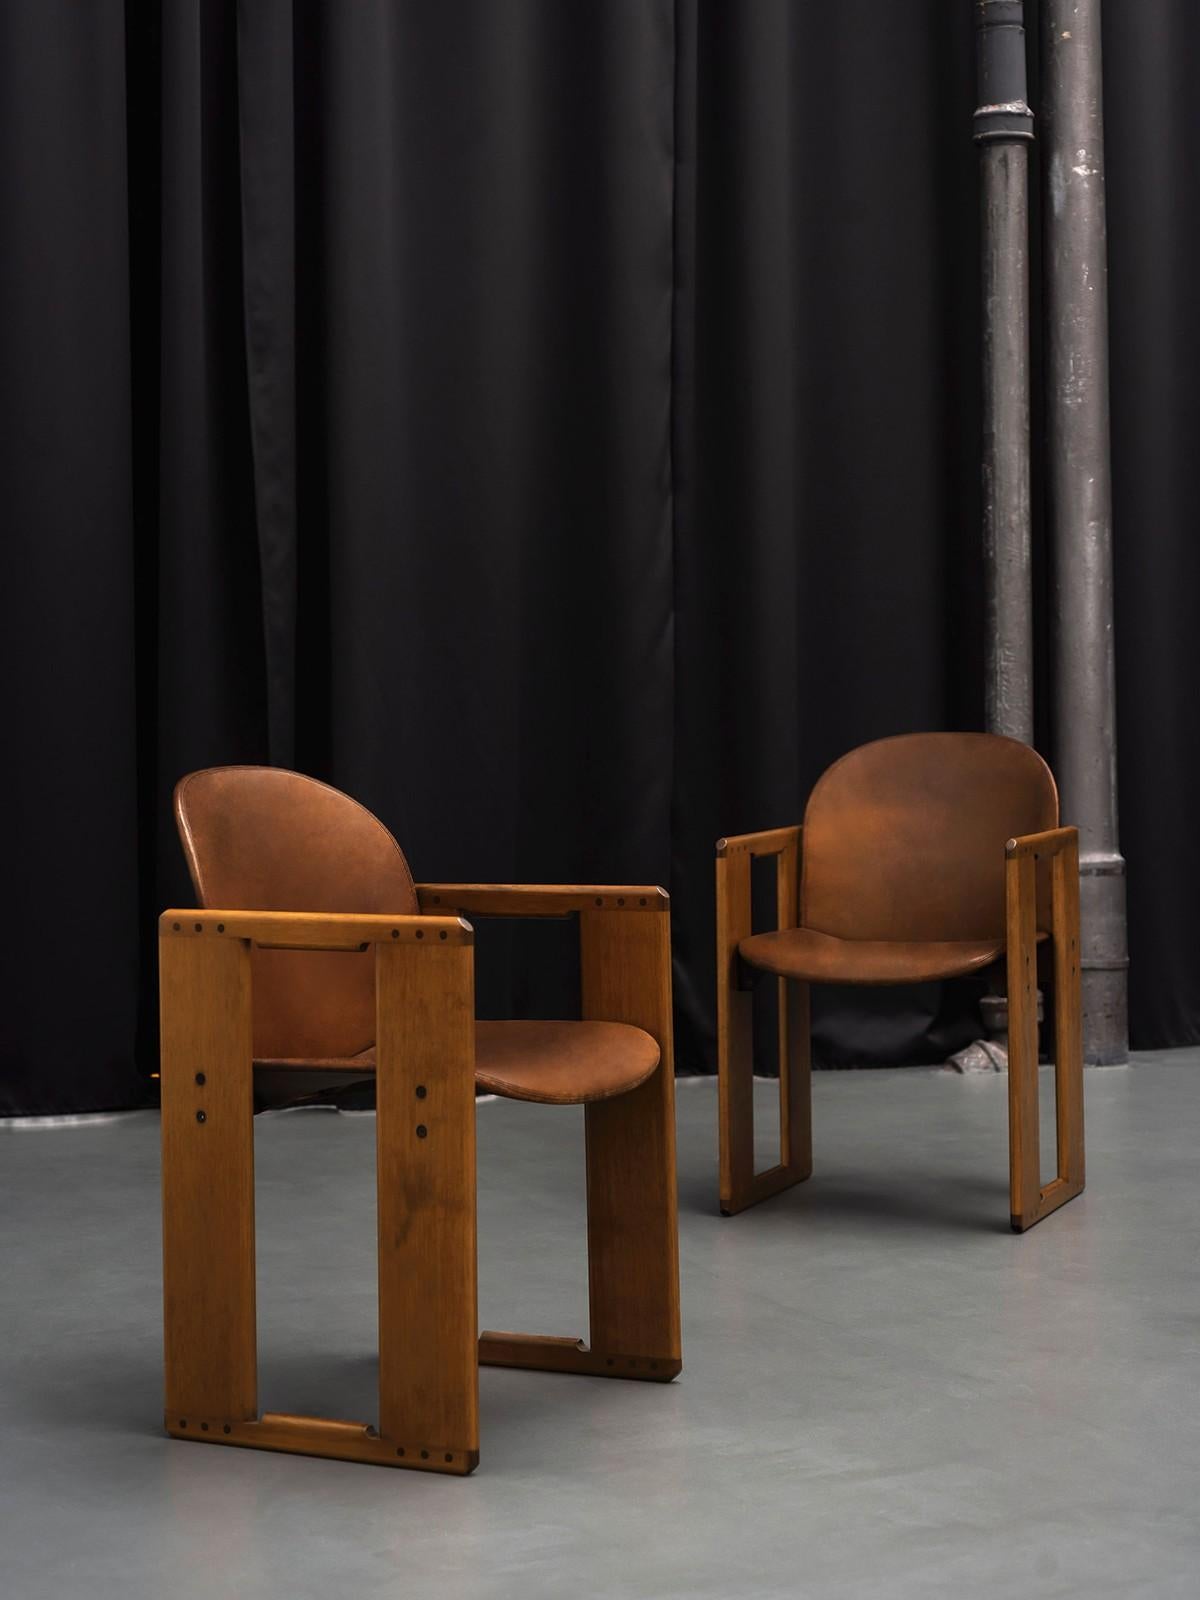 Circular elements fit together in a double circle that evokes the signature of the great master who designed it. Twin legs, created by the intersection of two cylinders, extend up to the backrest, to which they are linked by a thin metal ring that